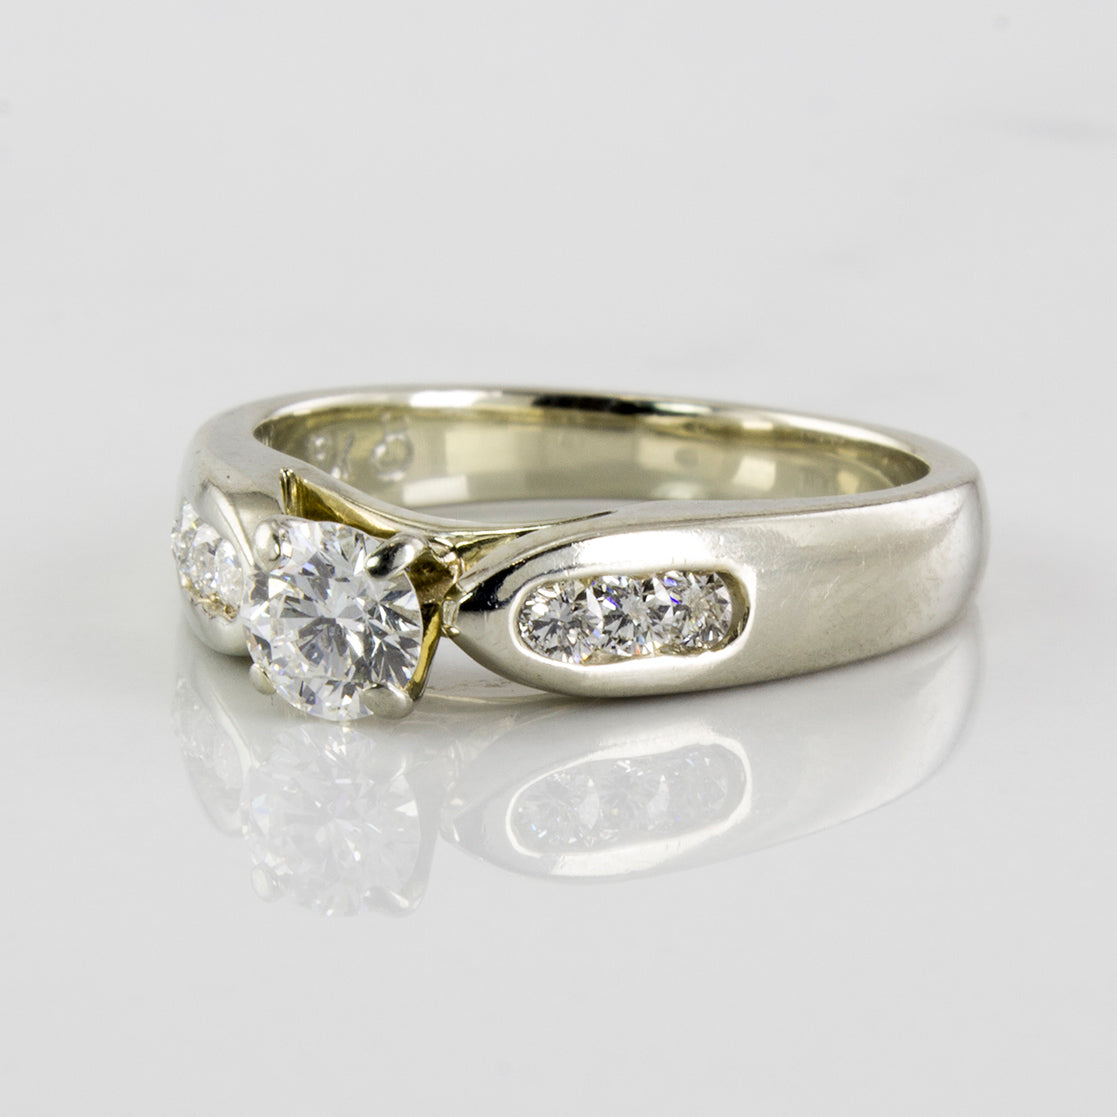 Wide Band Diamond Engagement Ring | 0.42 ctw | SZ 4.75 |